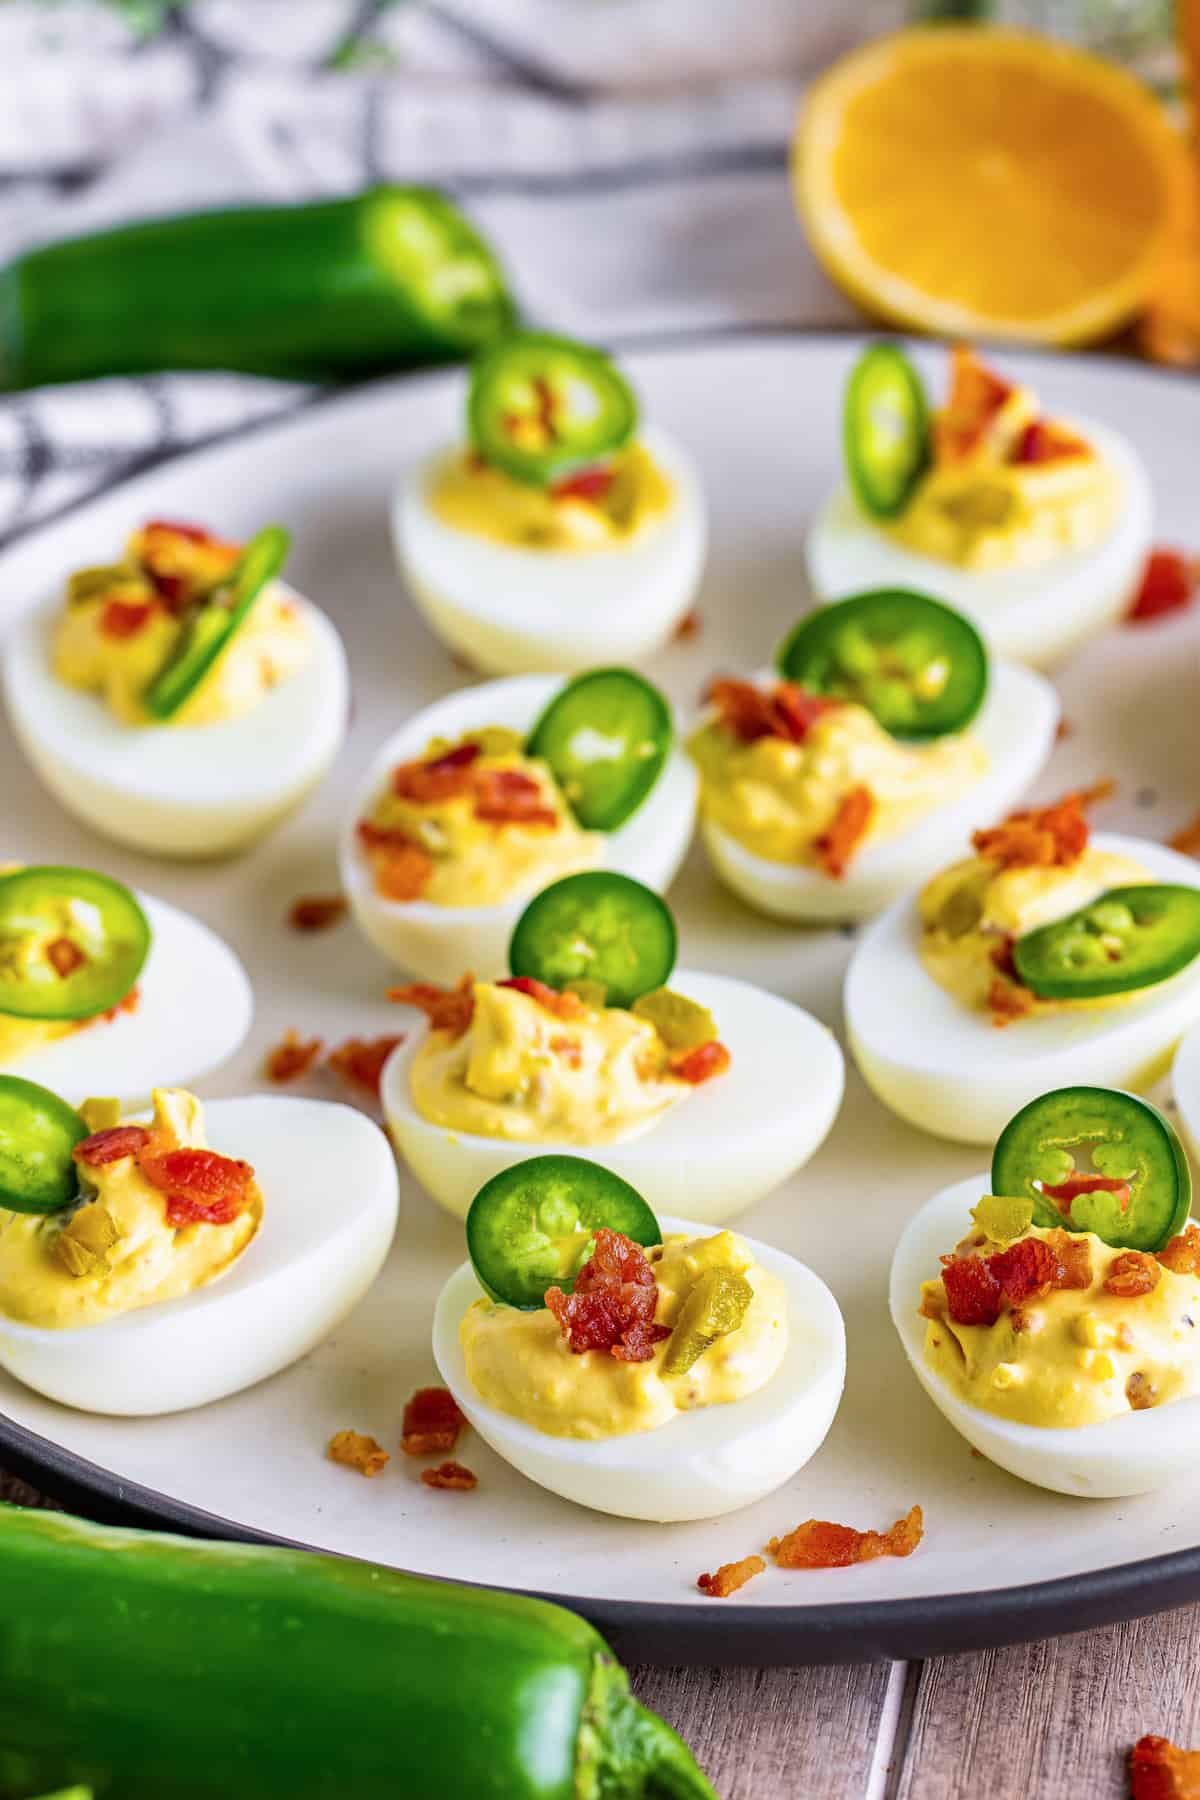 Jalapeno popper deviled eggs topped with crumbled bacon and a slice of jalapeno.